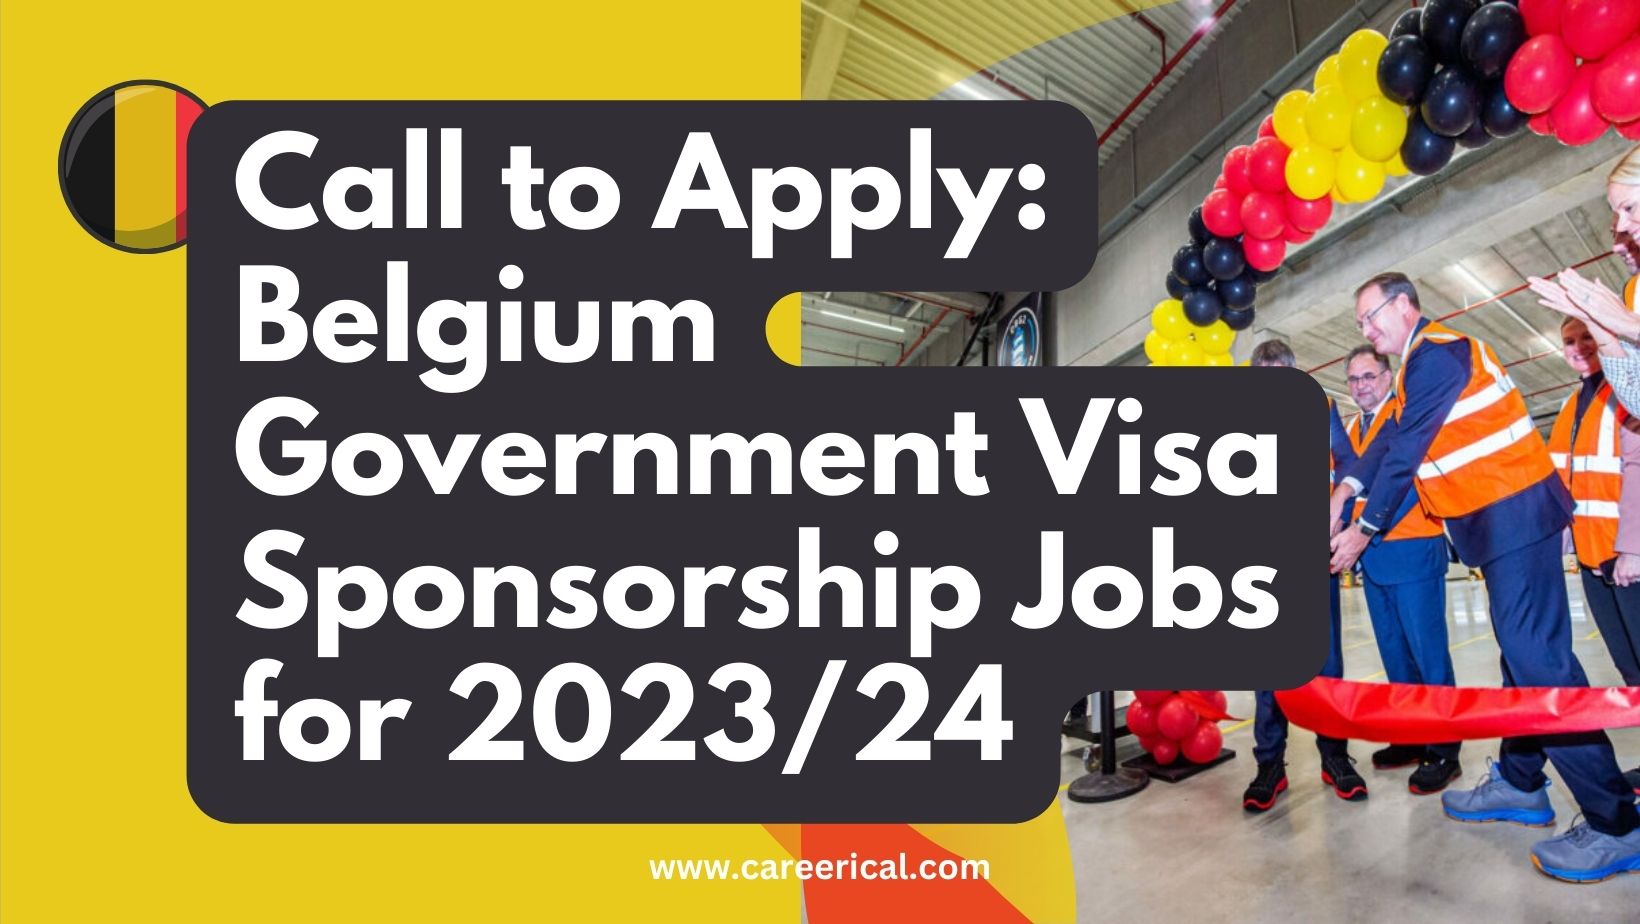 Call to Apply Belgium Government Visa Sponsorship Jobs for 202324